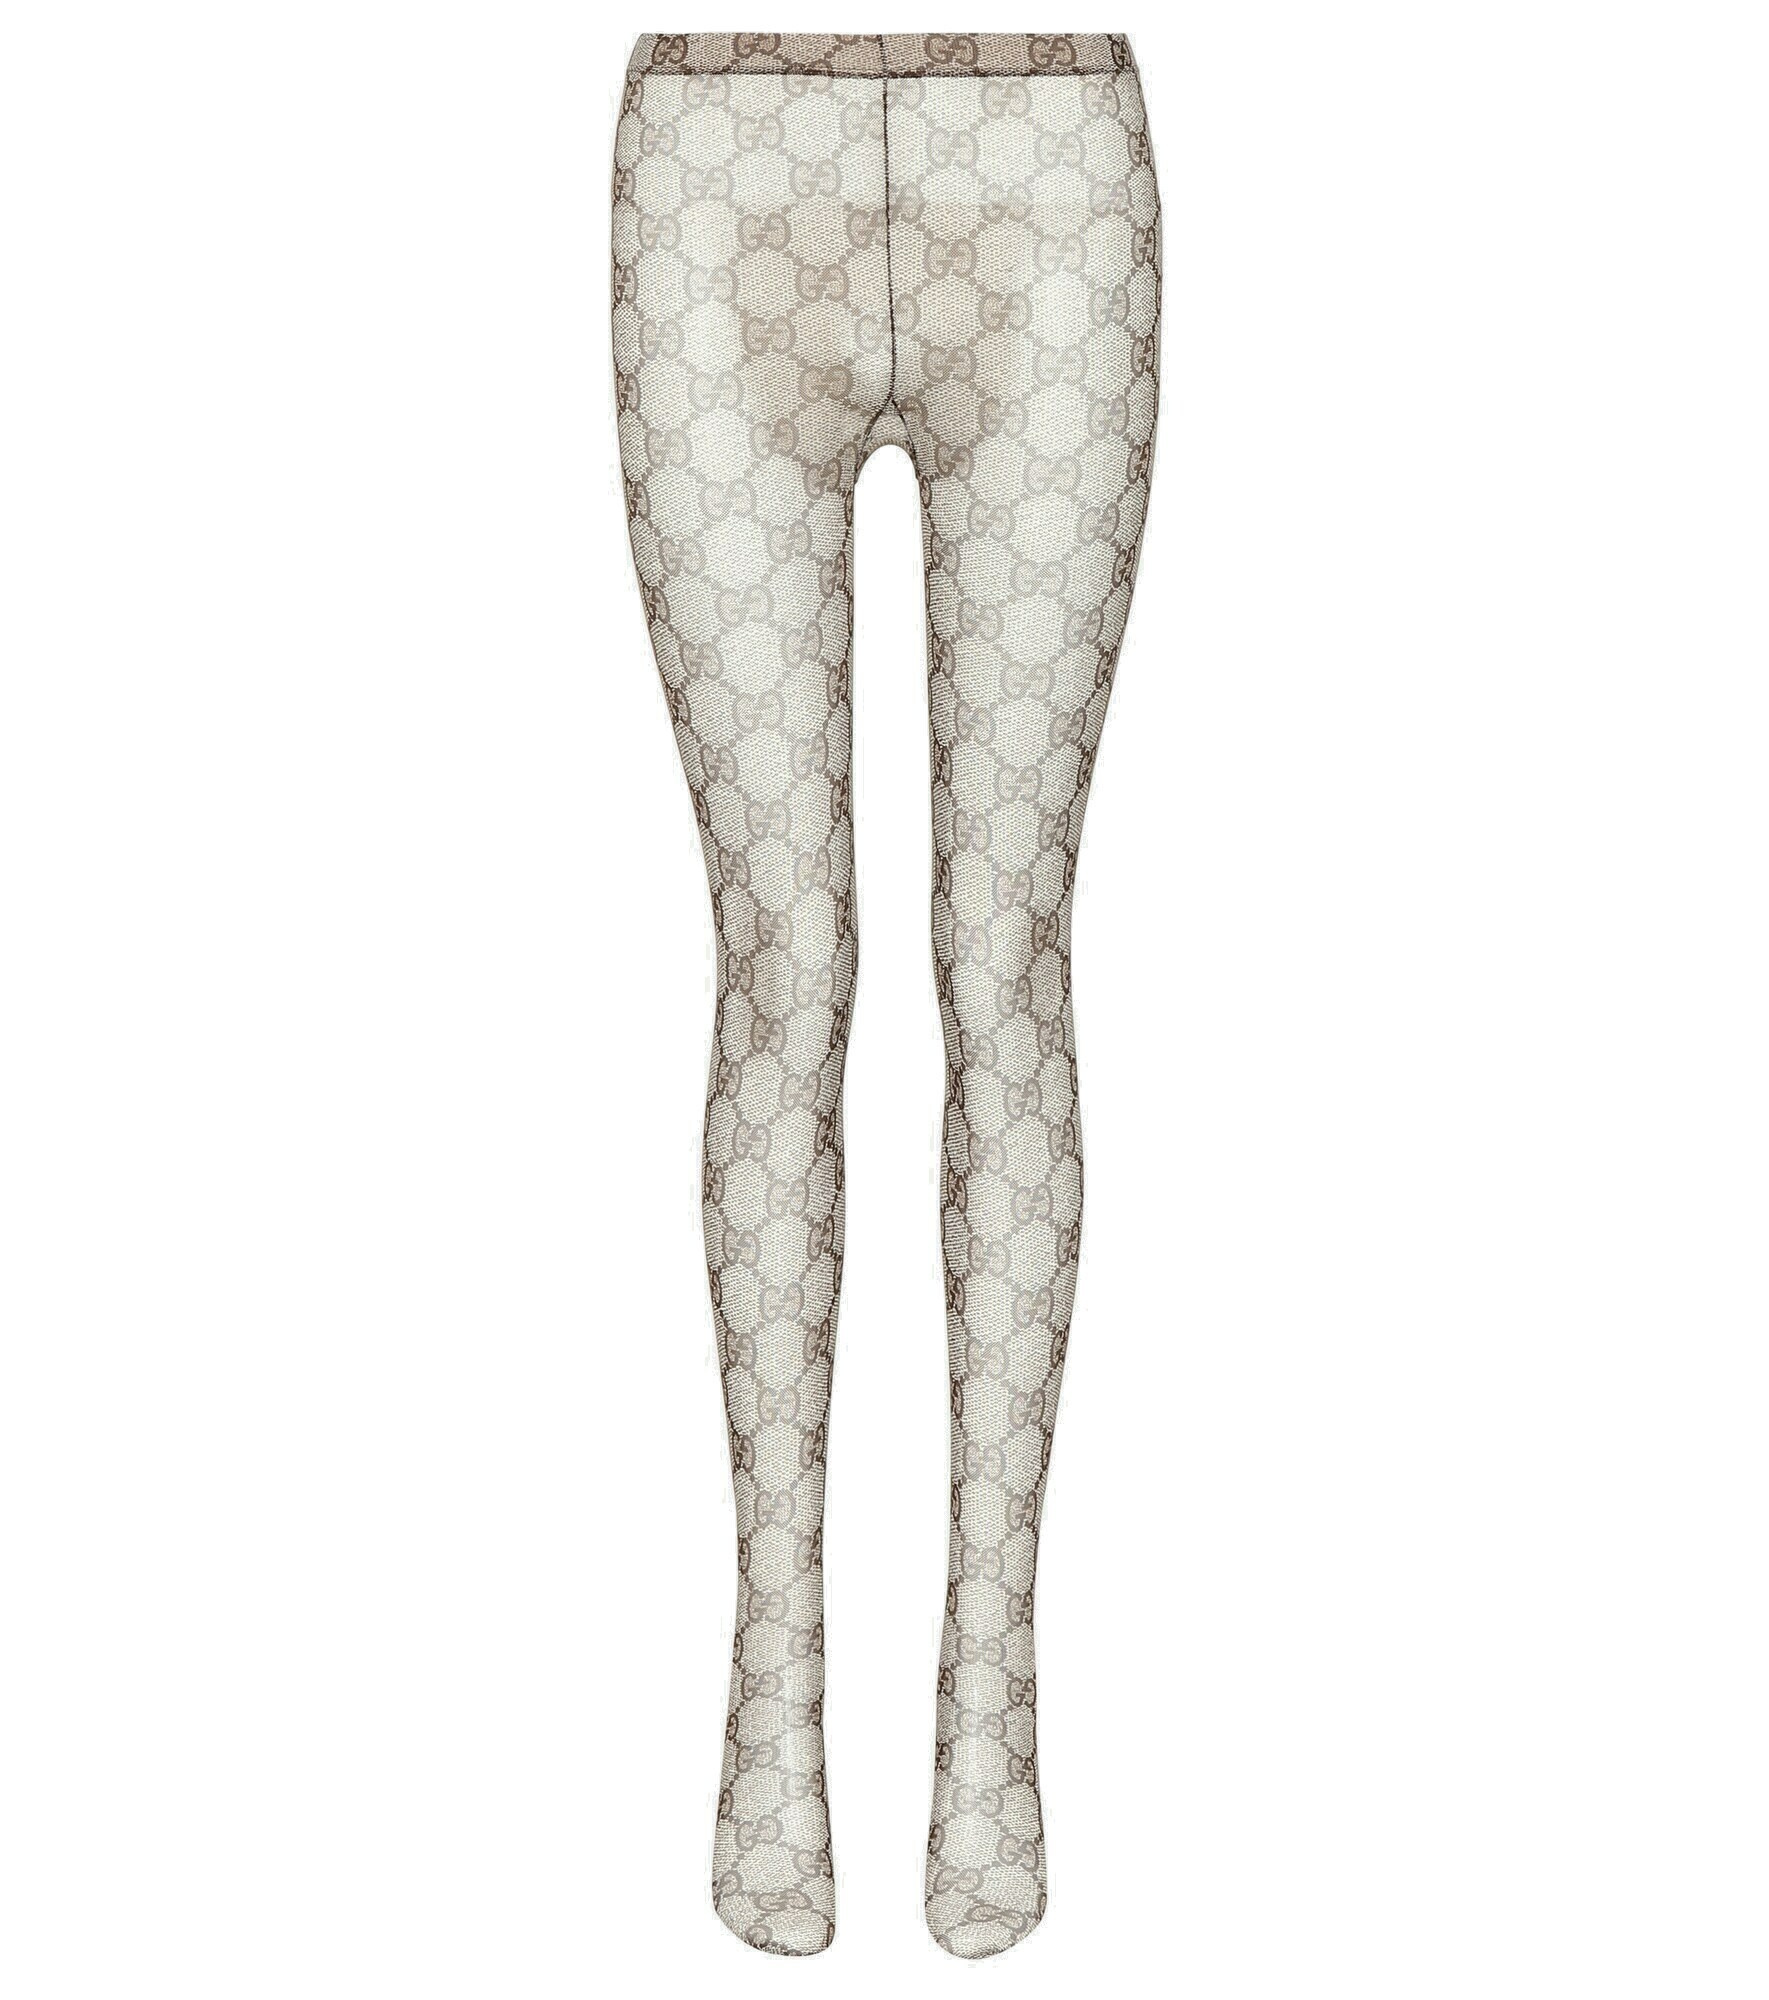 Gucci - GG patterned tights Gucci